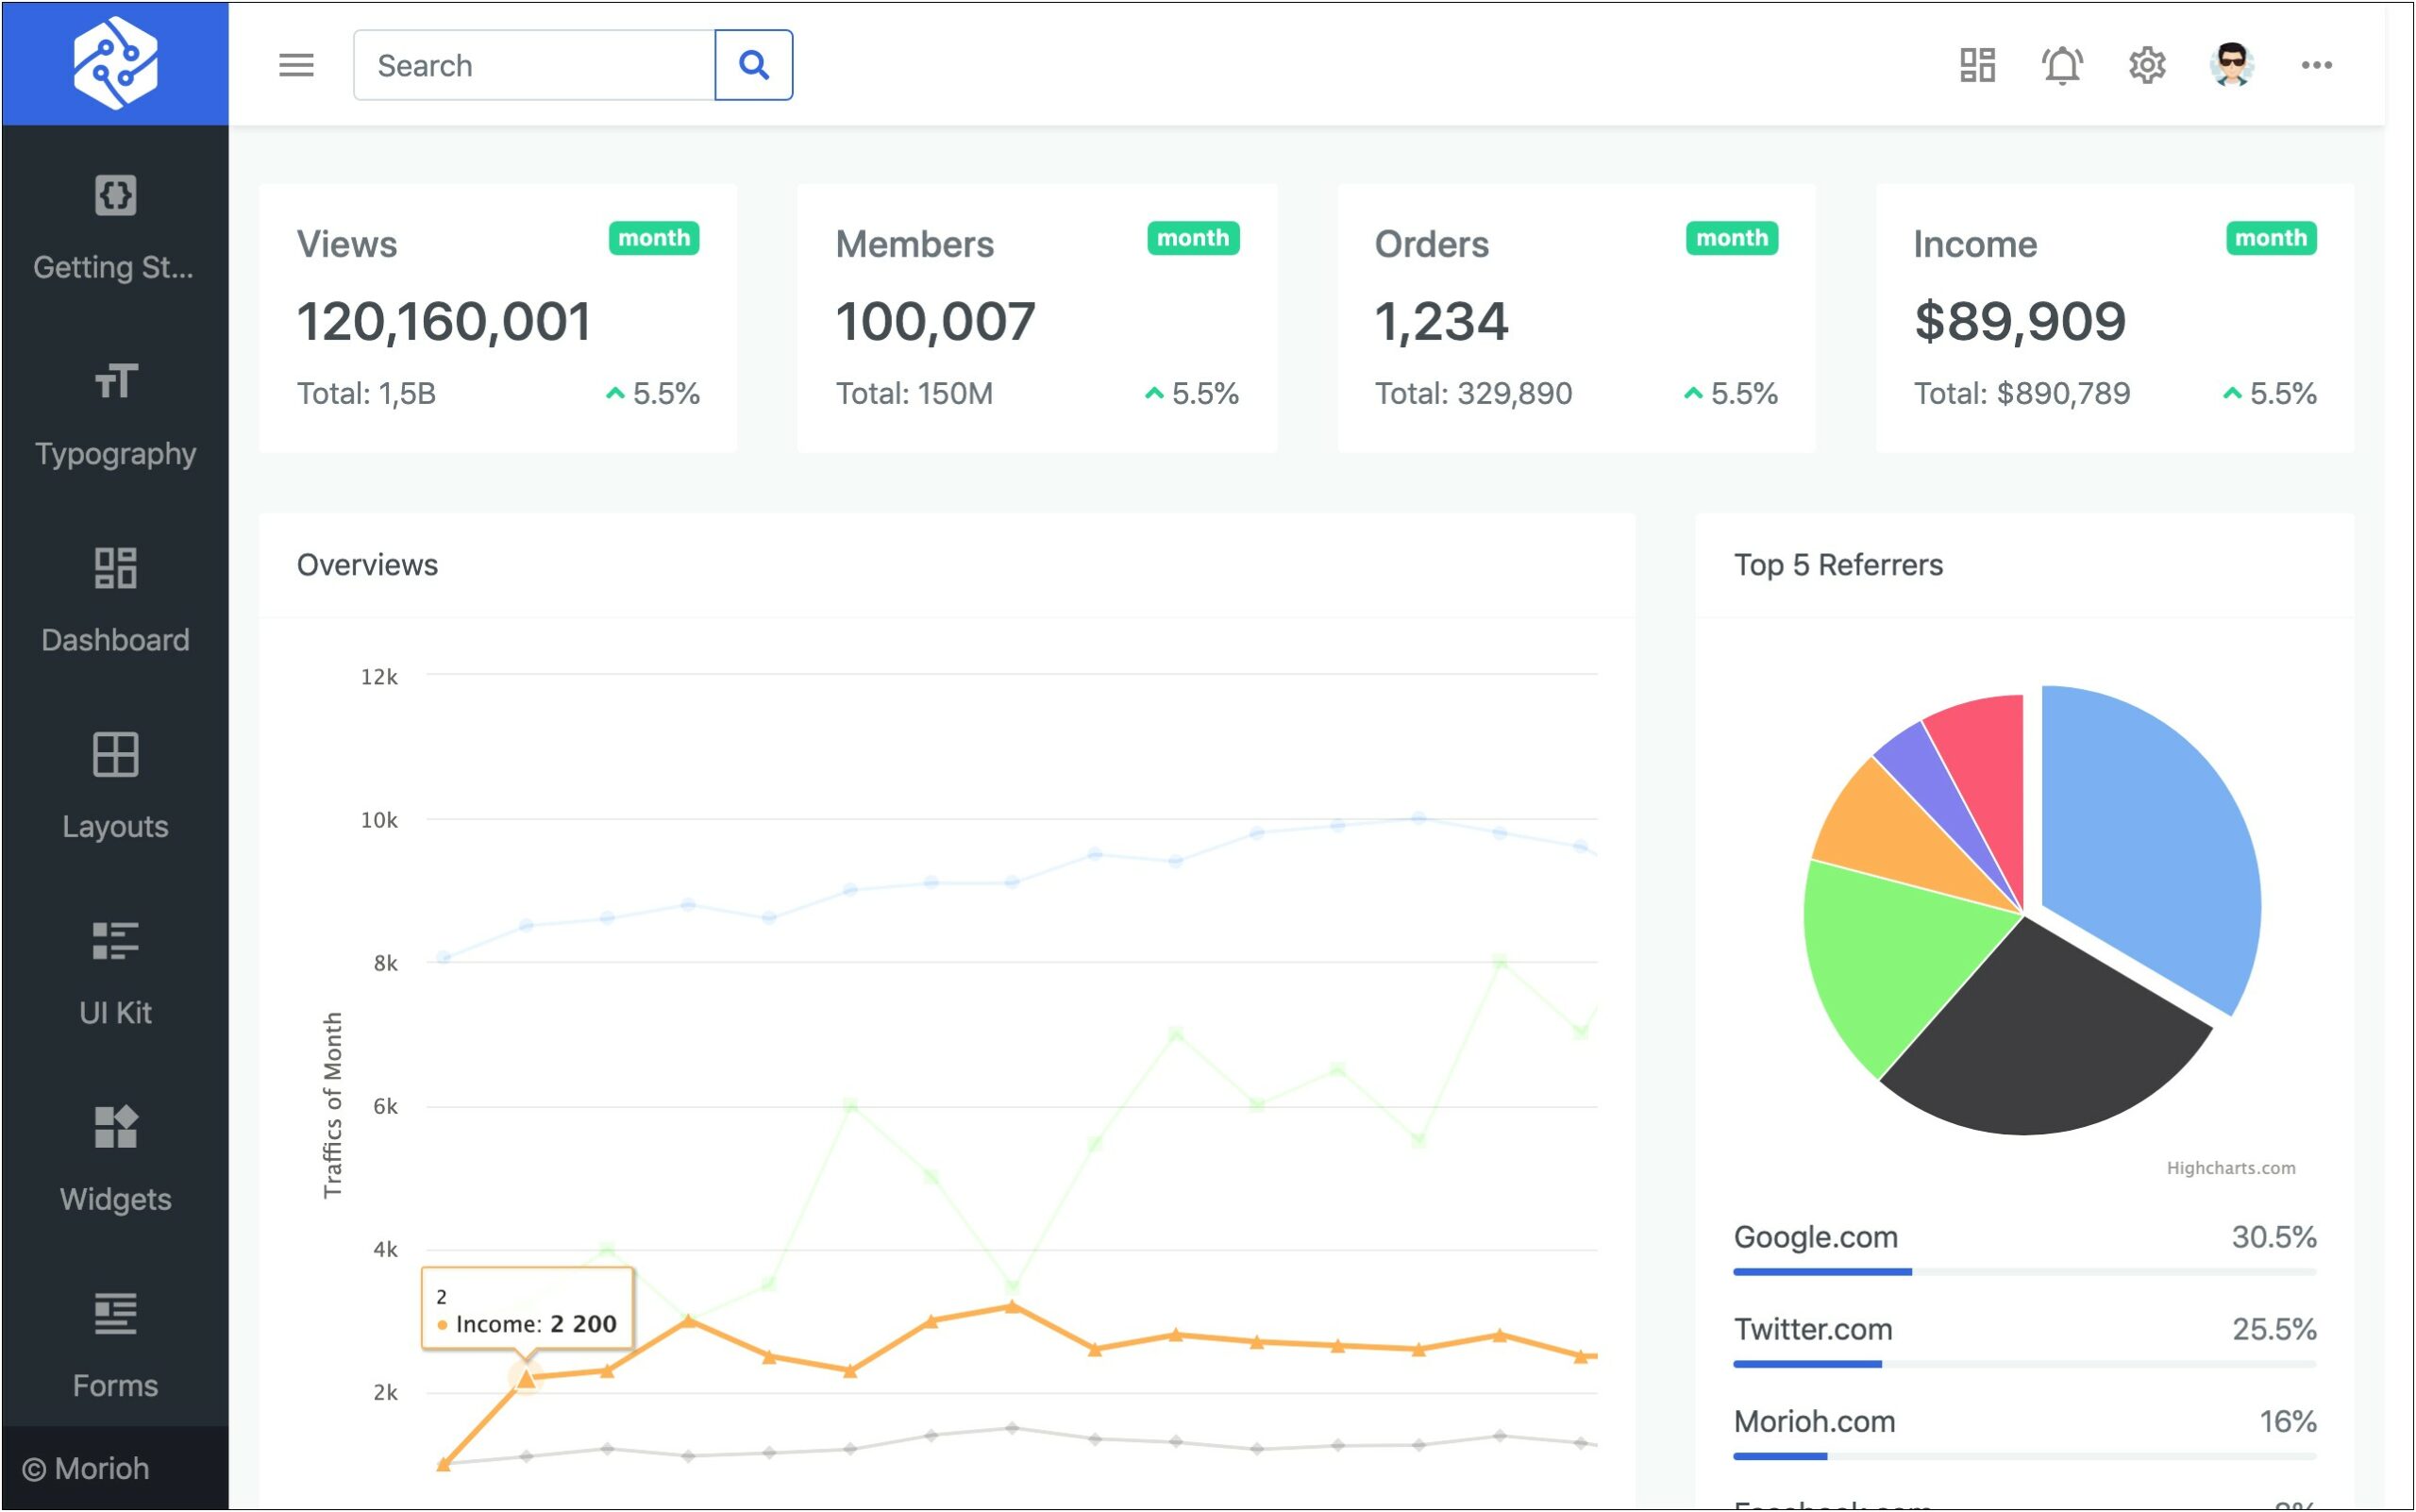 Dashboard Template Free Download Bootstrap 4